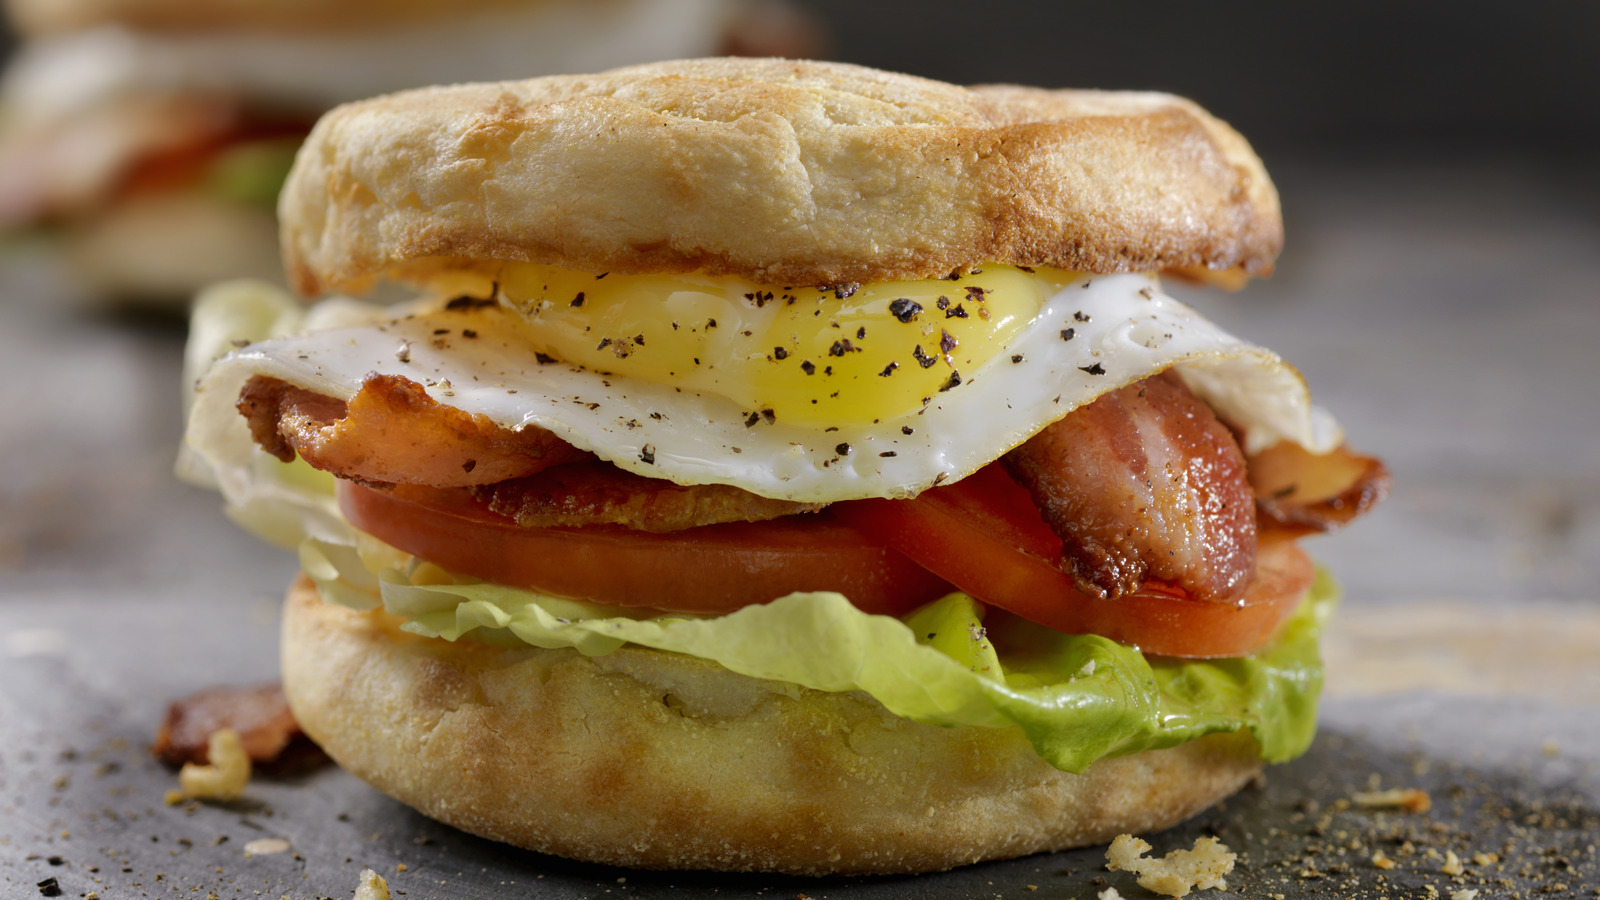 Yes, You Can Reheat Your Leftover Egg Sandwich In An Air Fryer